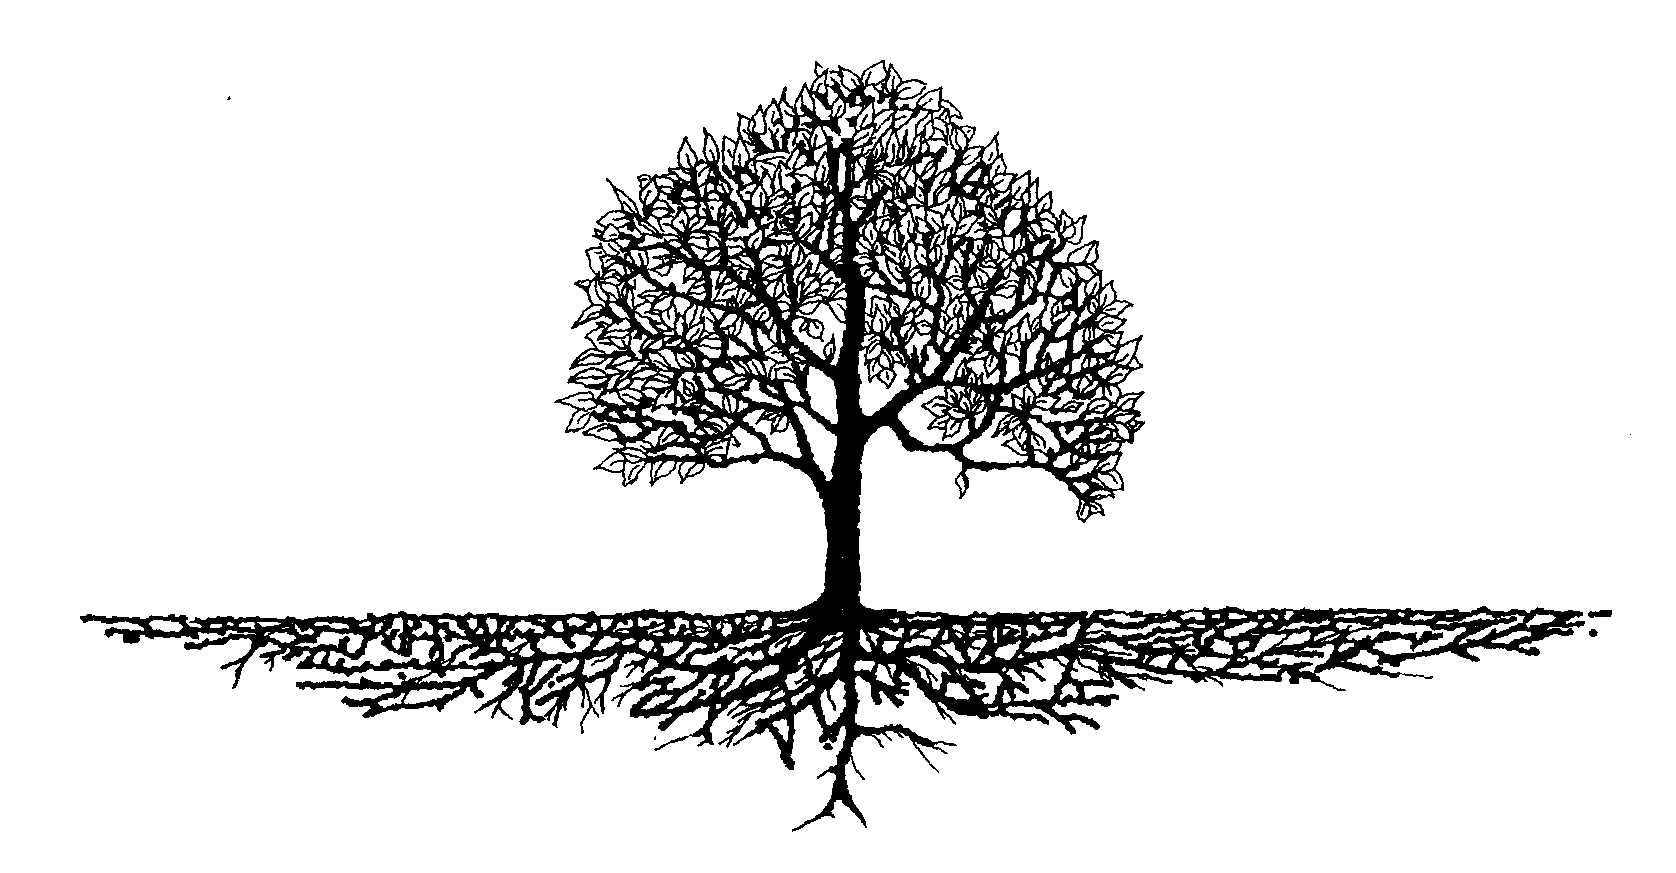 Picture Of A Tree With Roots